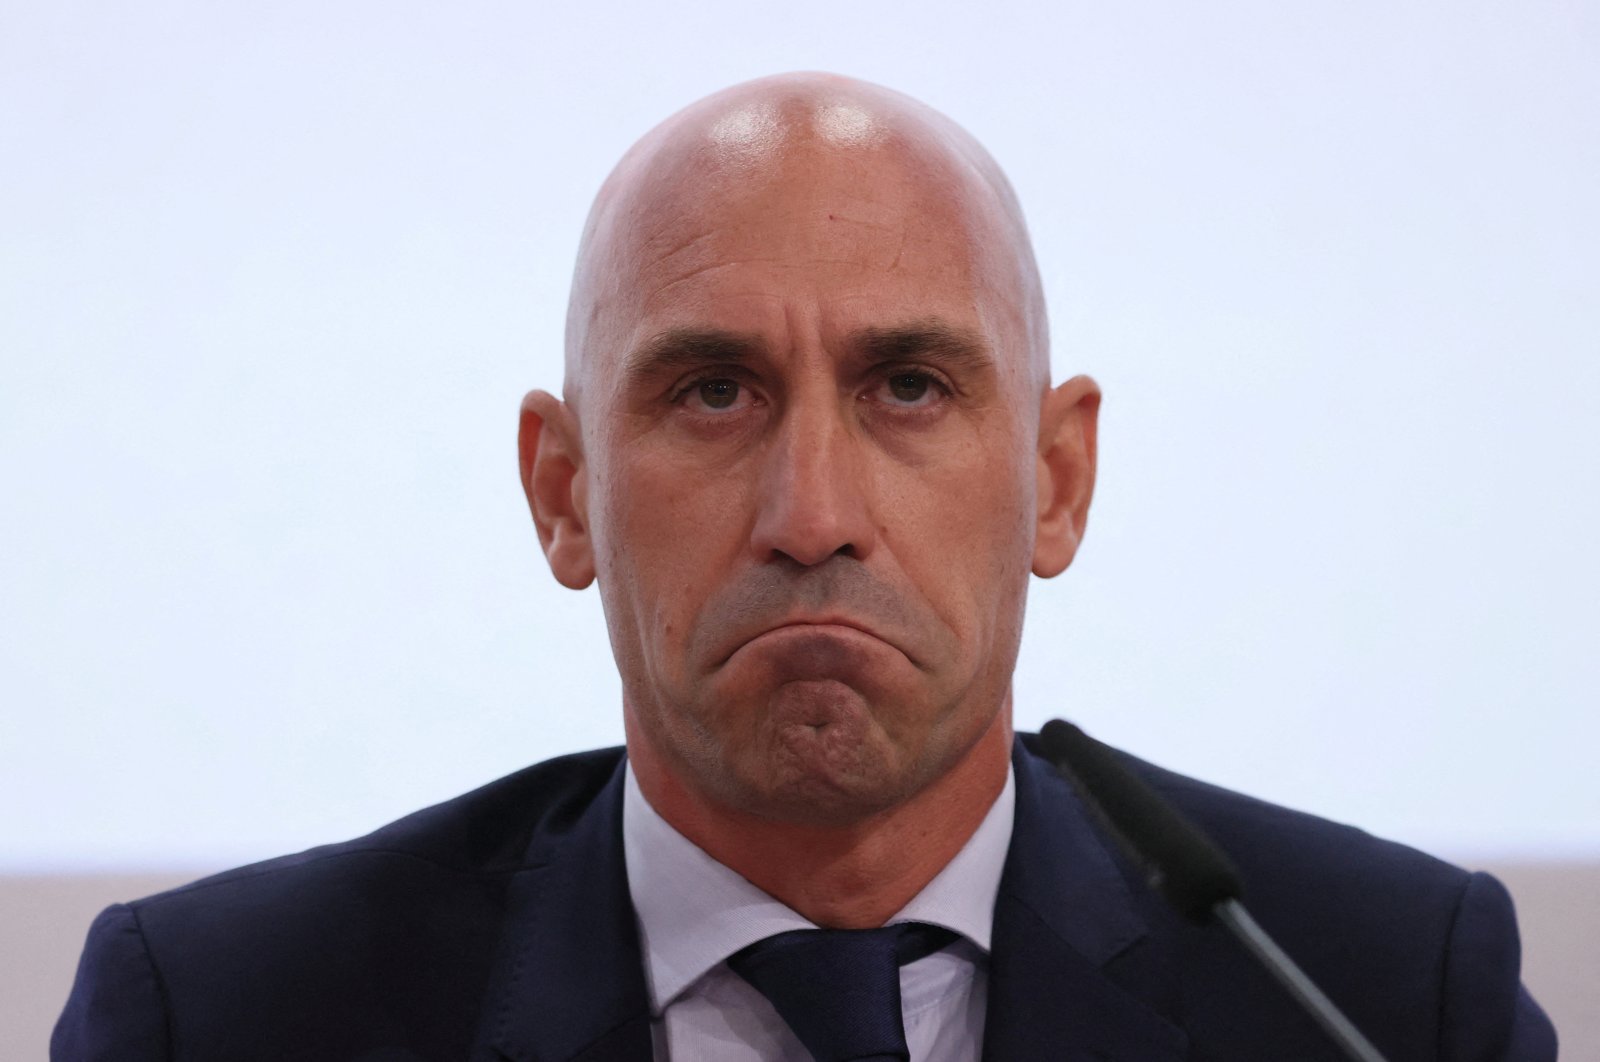 Spanish Football Federation President Luis Rubiales during the Portugal, Spain and Ukraine 2030 World Cup bid press conference at the UEFA headquarters, Nyon, Switzerland, Oct. 5, 2022. (Reuters Photo)